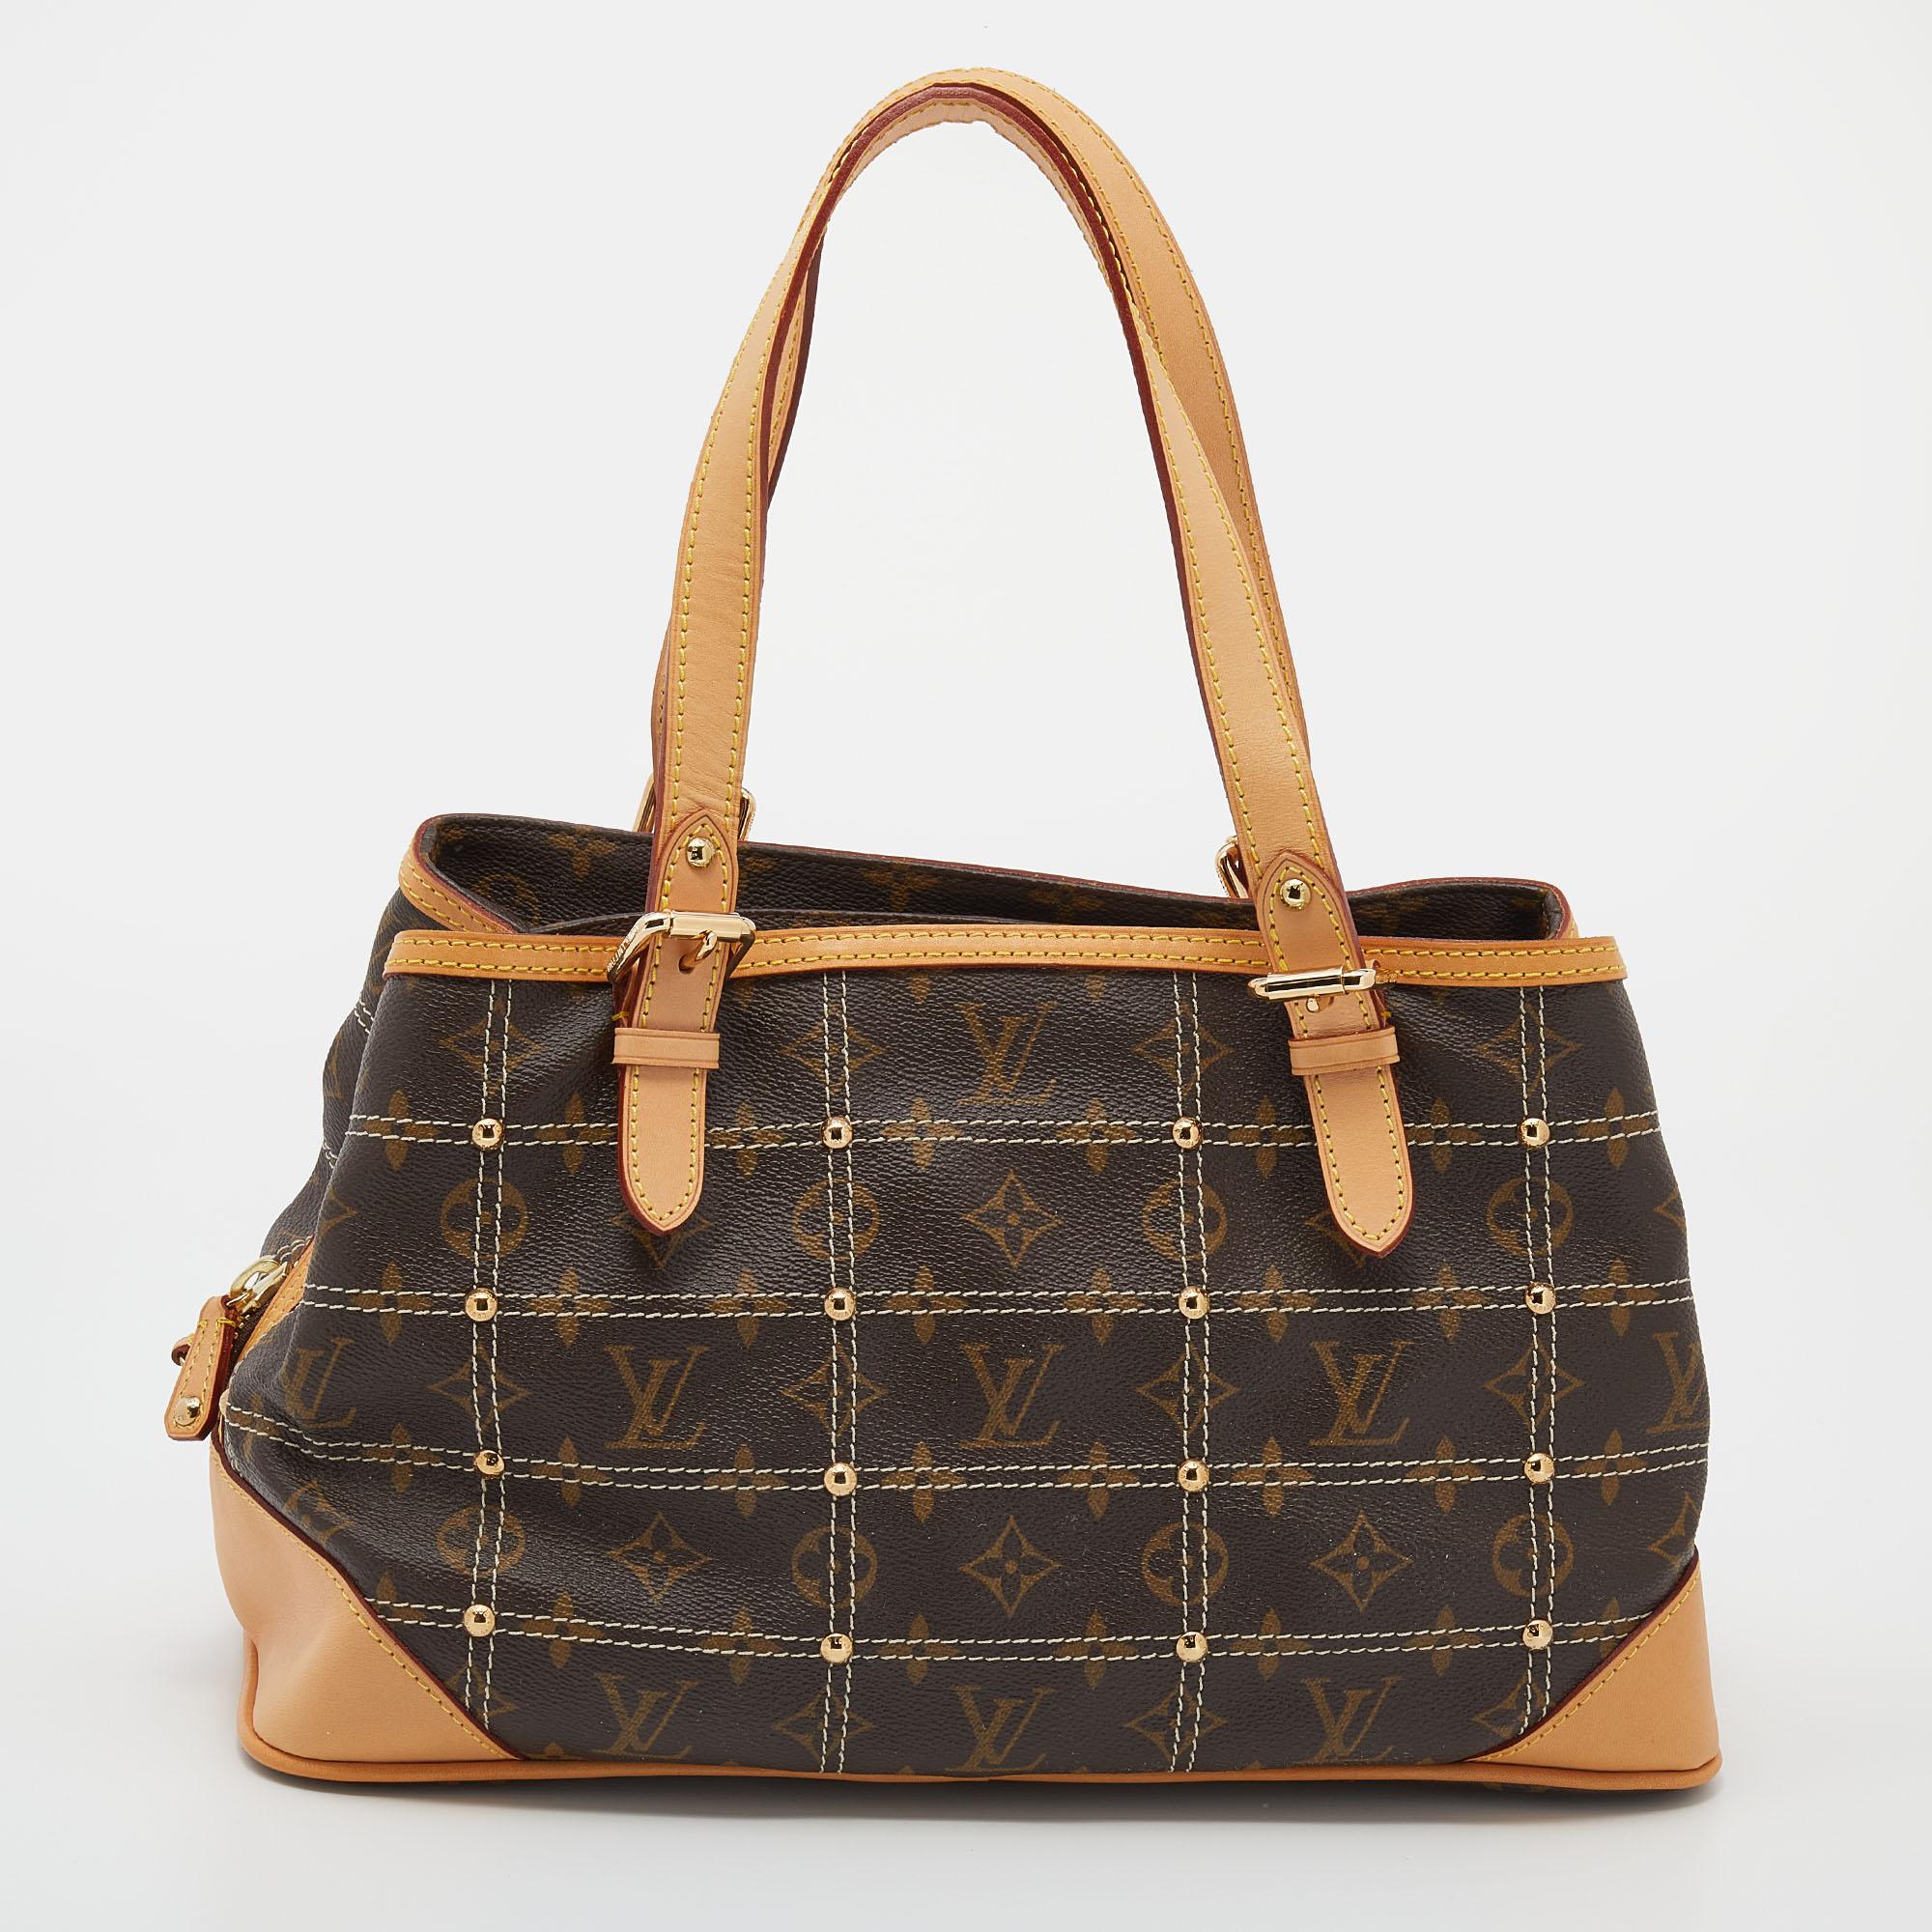 Louis Vuitton's special Riveting bag in limited edition, just for you! Made in France, this amazing bag arrives in monogram canvas and leather. It features dual top handles, gold-tone hardware, zip detailing on the exterior, and the LV Inventeur